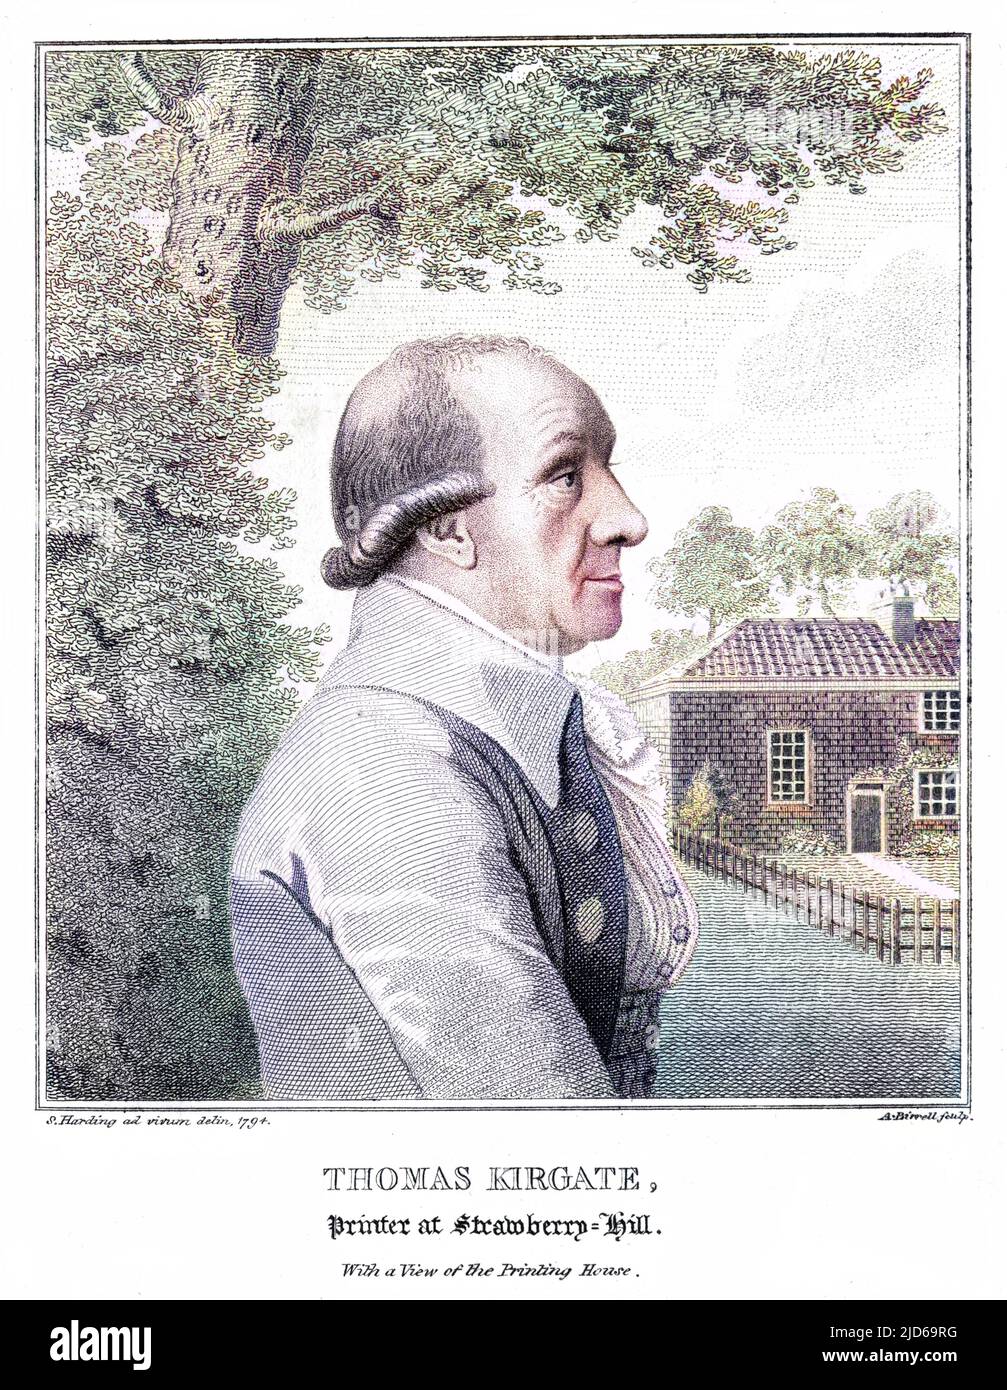 THOMAS KIRGATE Printer at Strawberry Hill, near London - that's his printing office in the background - who printed the writings of Horace Walpole. Colourised version of : 10162293       Date: ? - 1810 Stock Photo